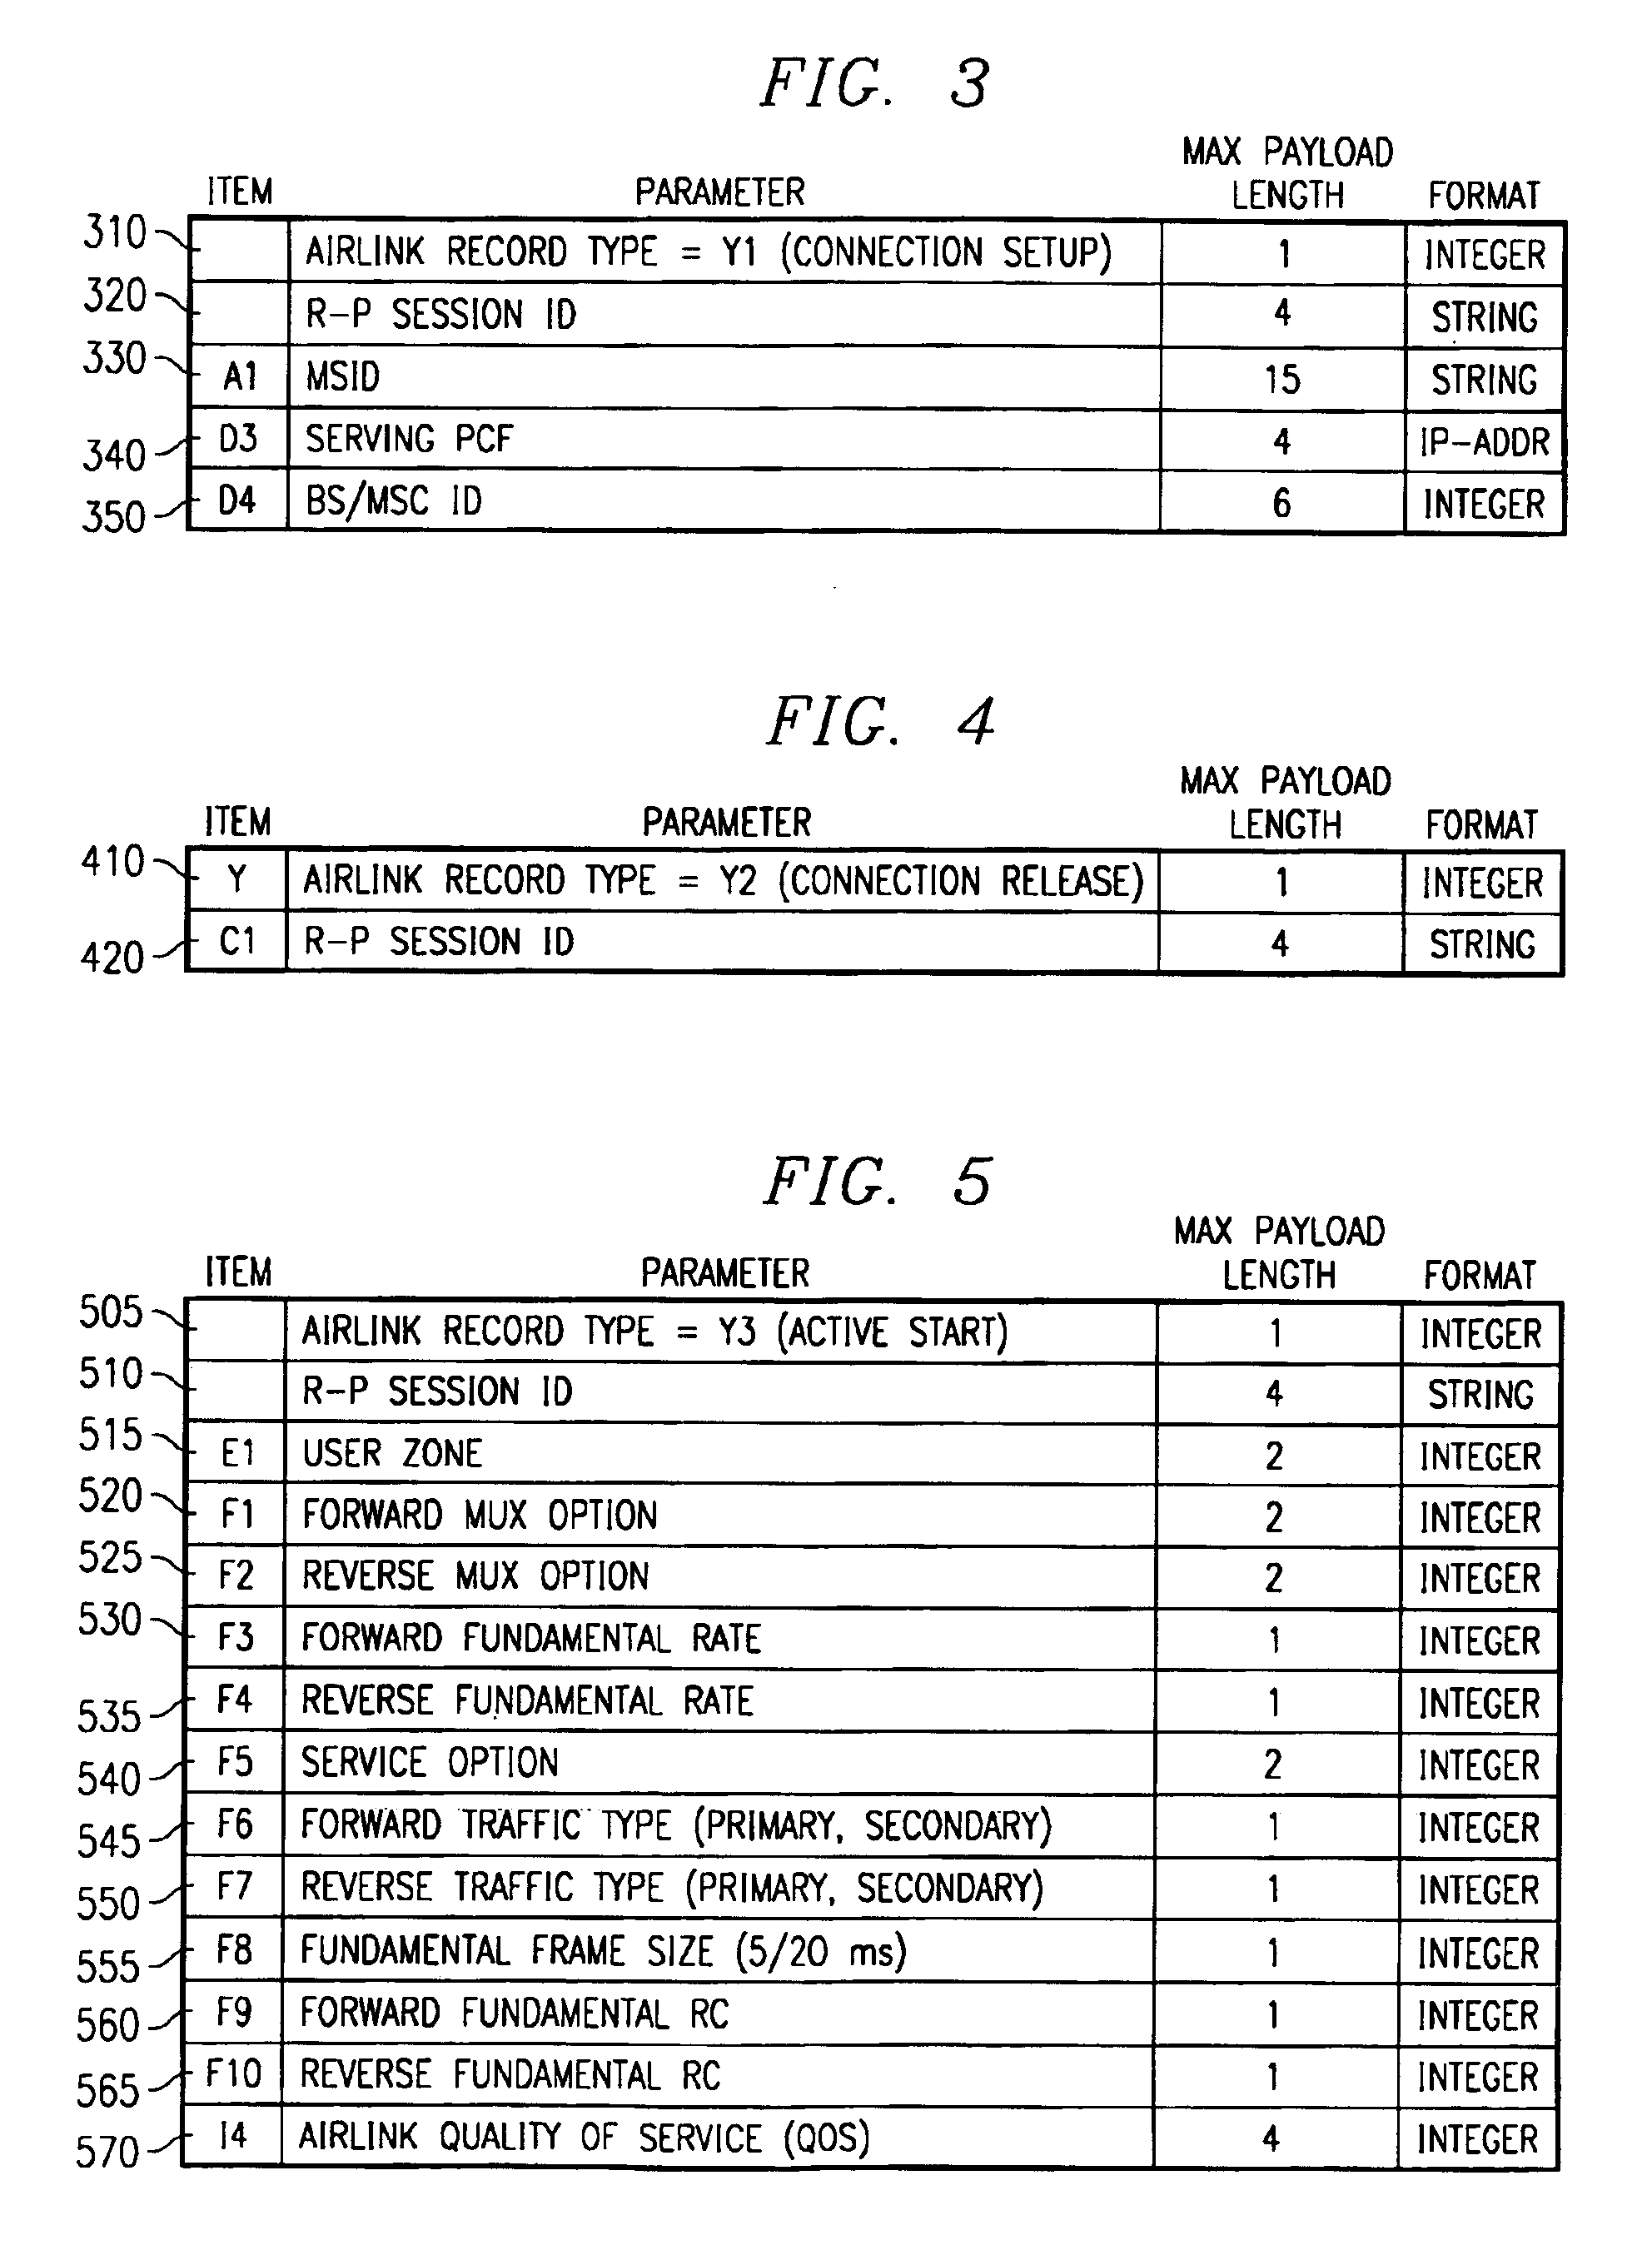 Method and apparatus for merging accounting records to minimize overhead